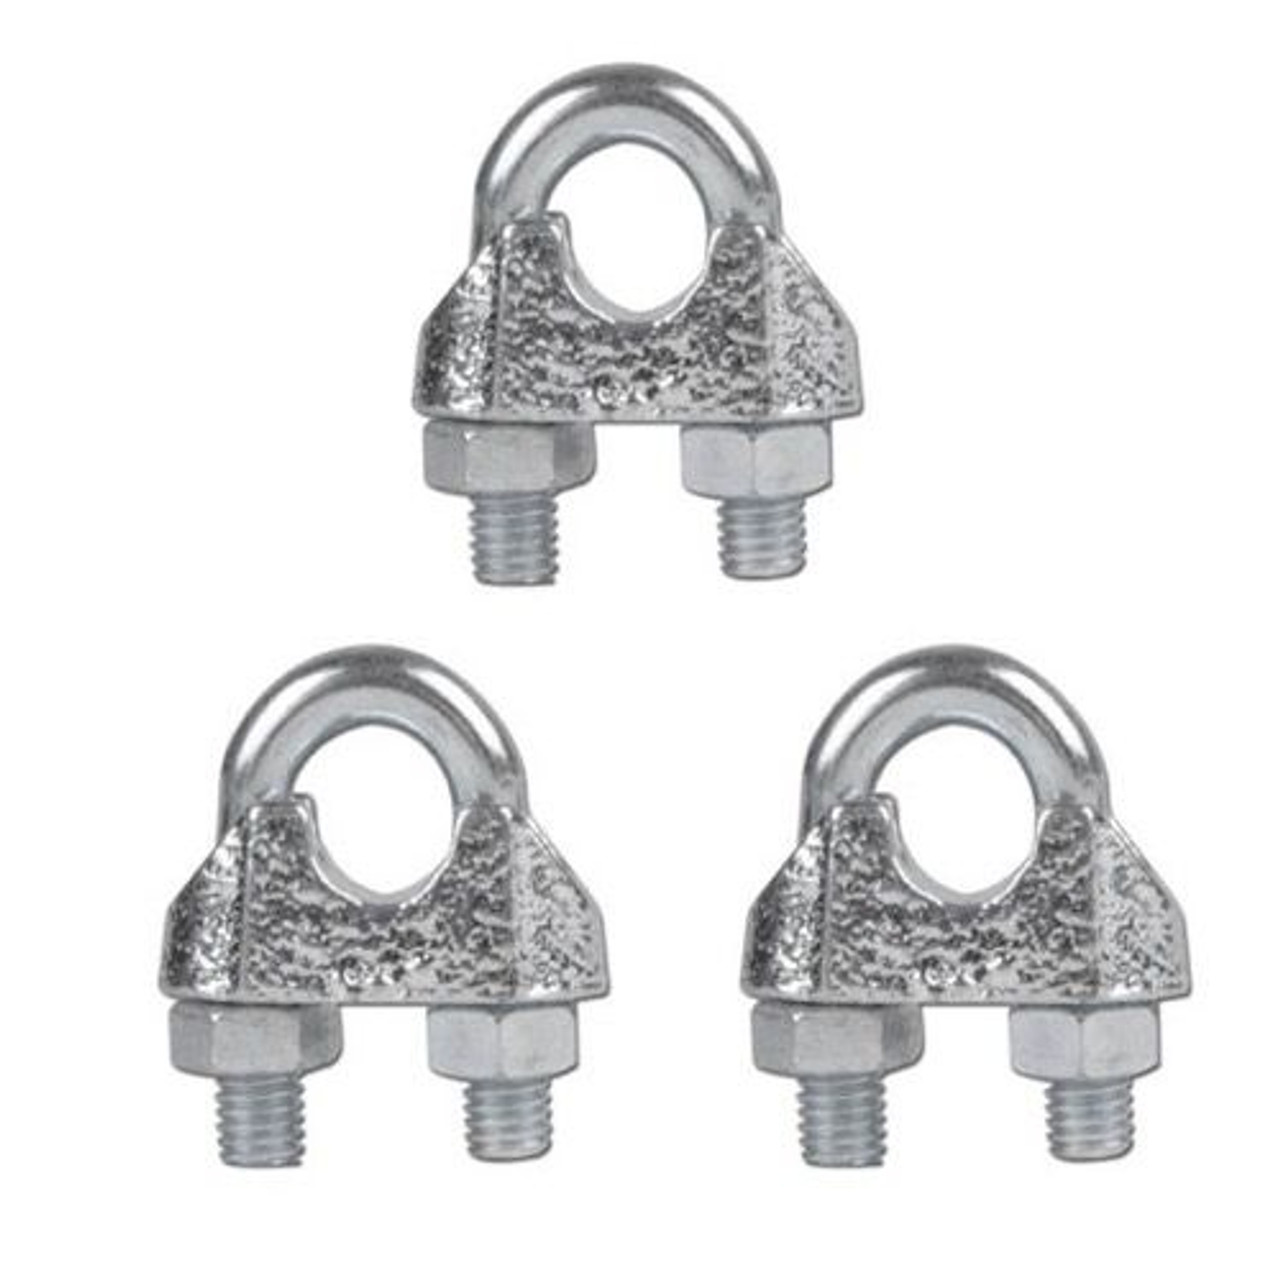 Eagle U-Bolt Cable Clamp Guy Wire 1/8 U-Bolt Fit Up to 1/4 Cable 3 Pack Zinc Plated Antenna Mast Support Fastener CM3095 HDTV Antenna Mount, Part # CM-3095